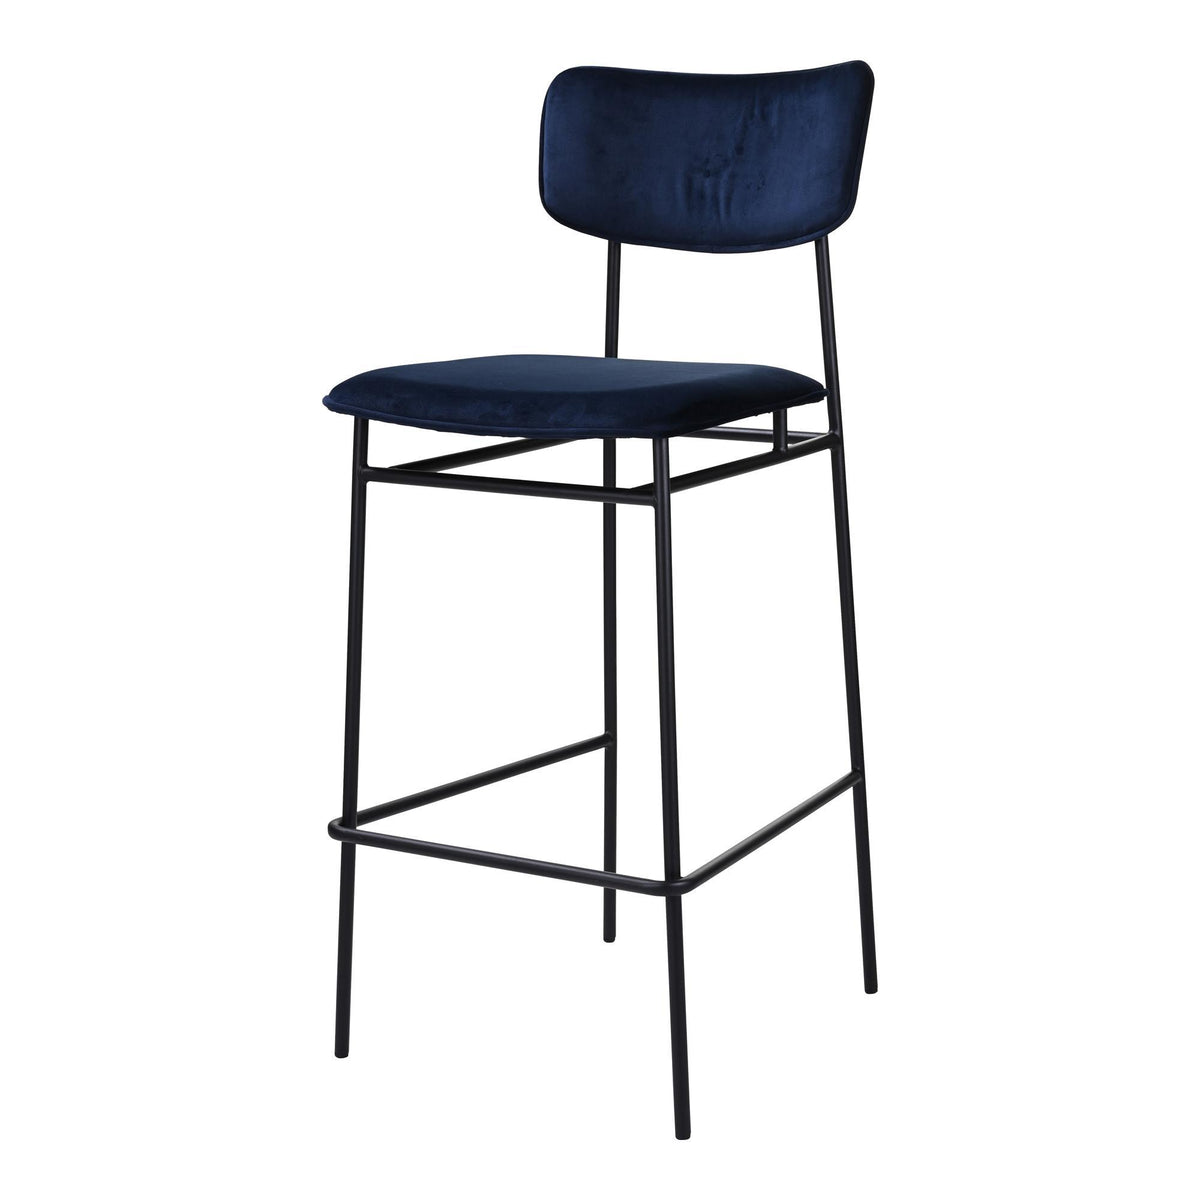 Moe's Home Collection Sailor Barstool Blue - EQ-1014-26